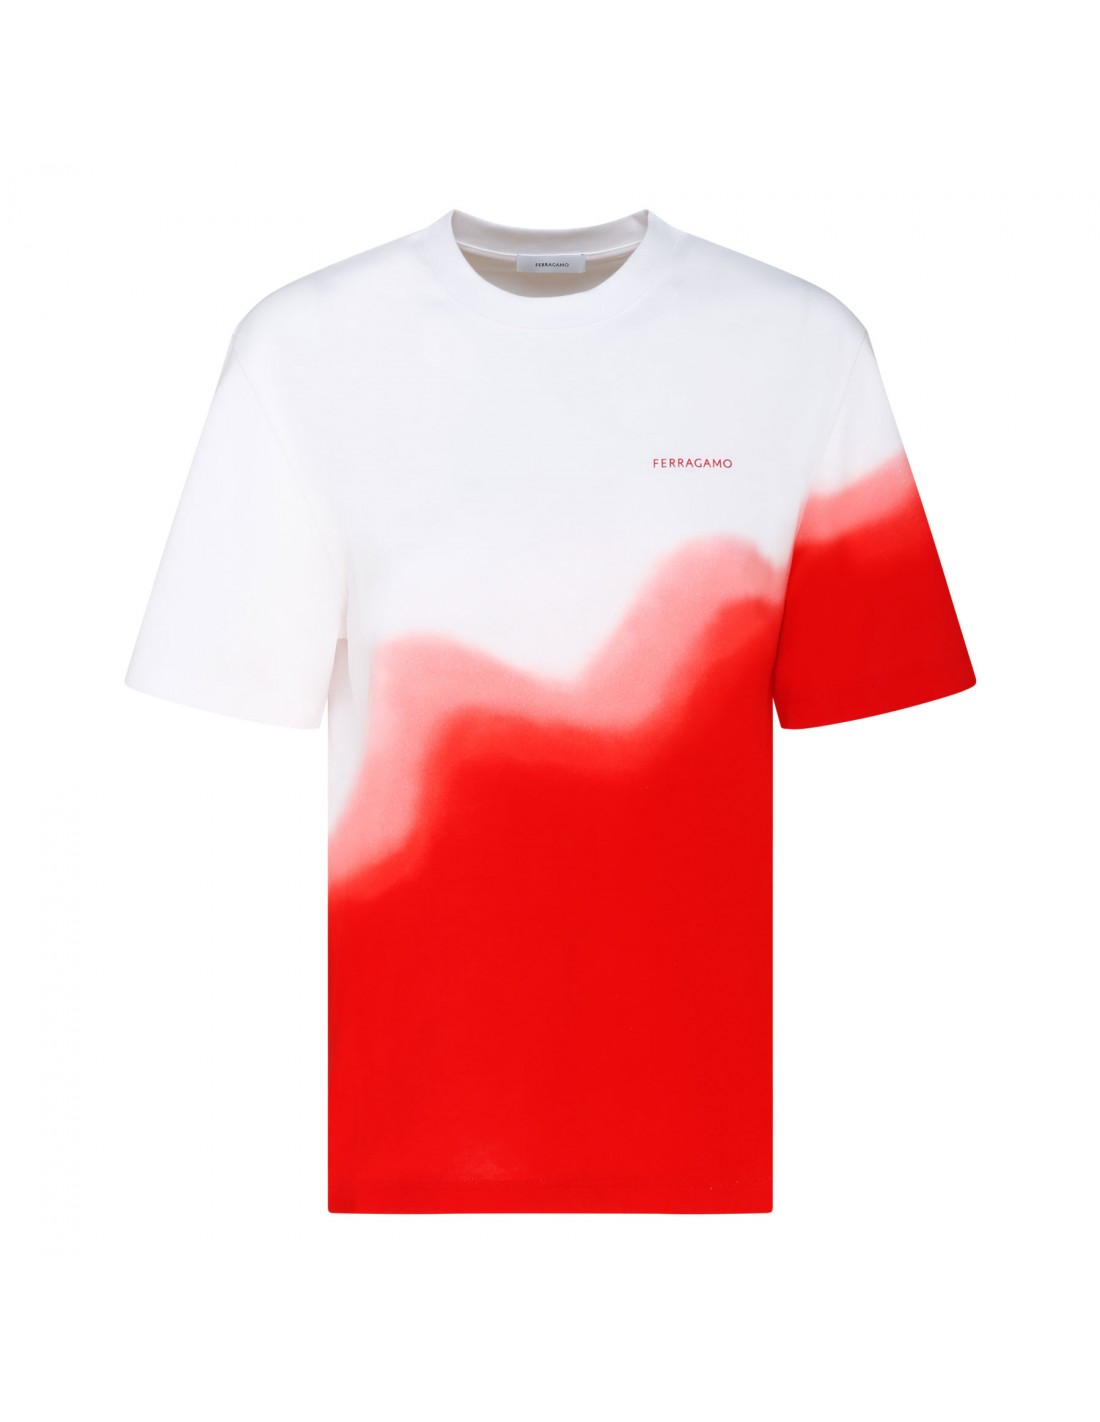 Tie-dye white and red T-shirt